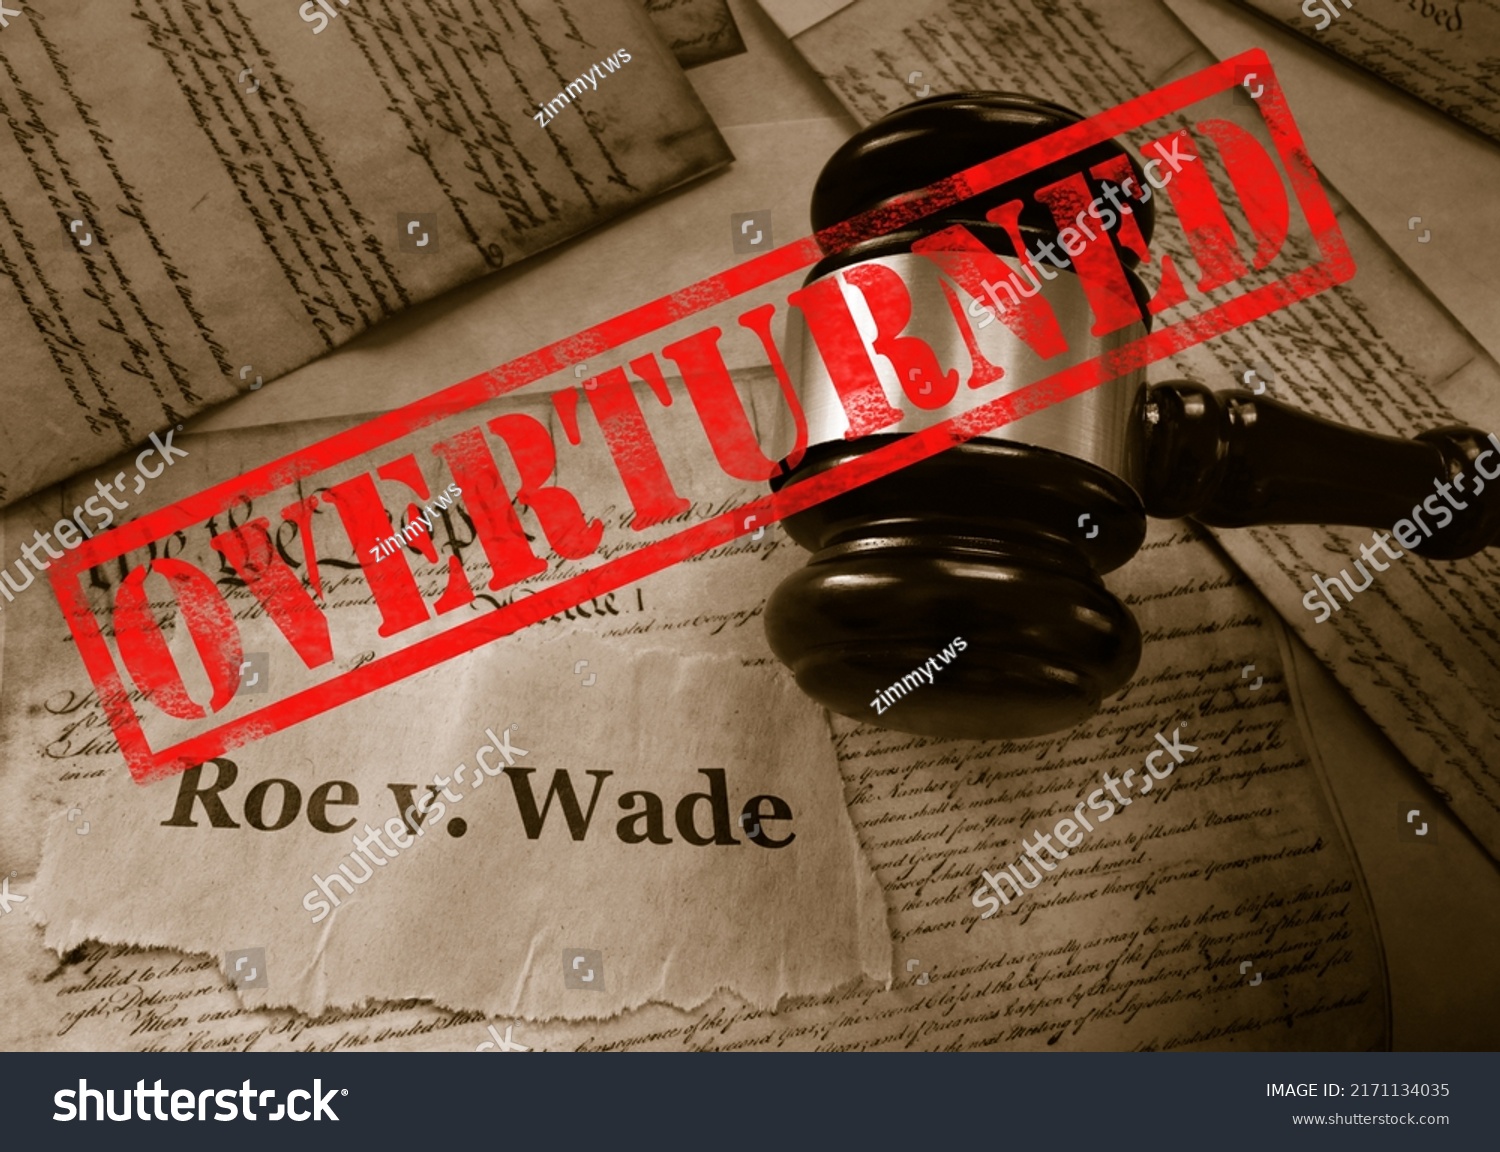  Roe v Wade news headline with gavel and Overturned stamp on a copy of the United States Constitution                               #2171134035